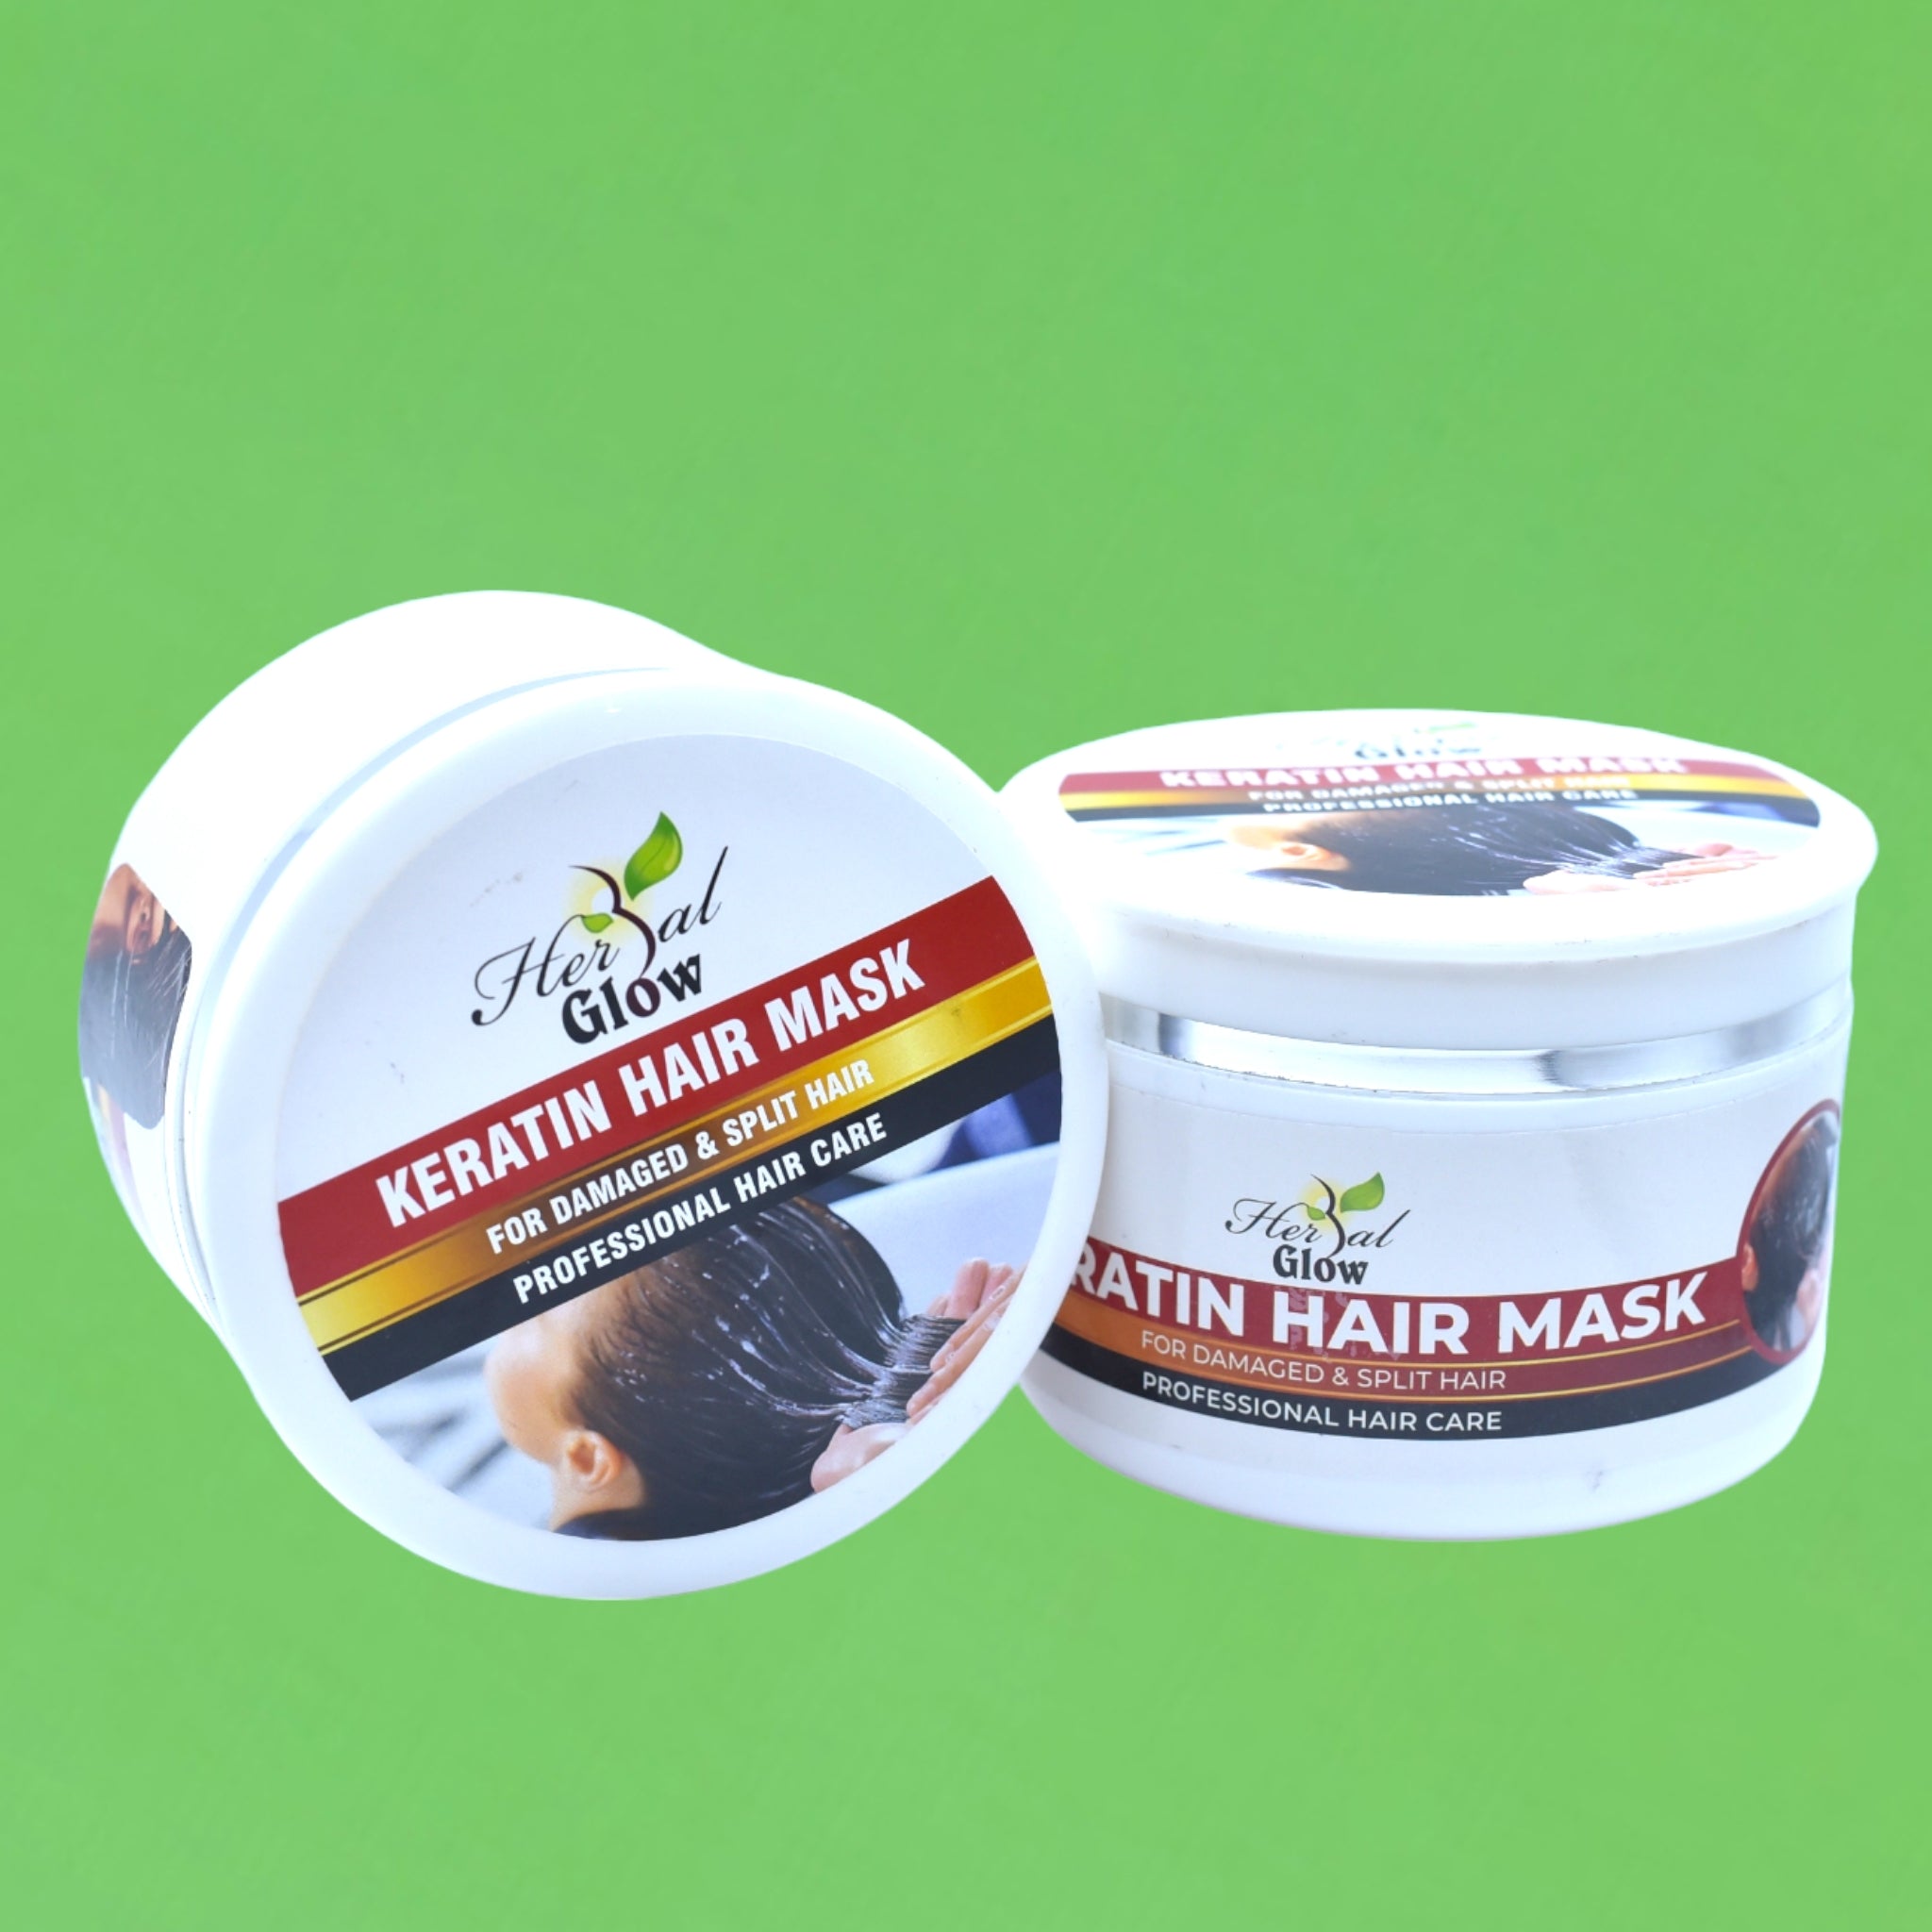 Keratin Hair Mask - Restore Your Hair's Strength and Shine by Herbal Glow